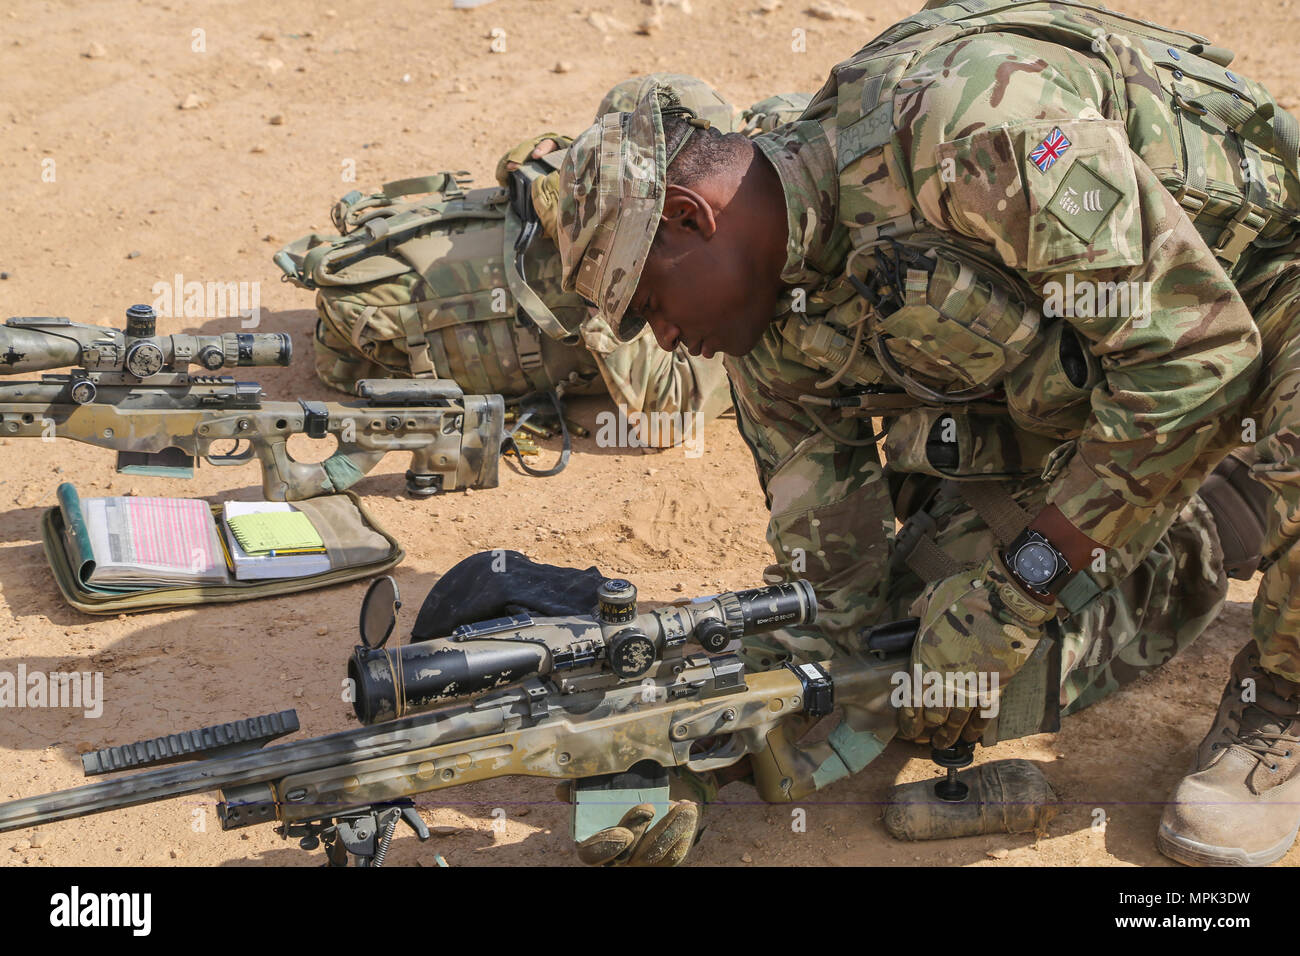 A British trainer deployed in support of Combined Joint Task Force – Operation Inherent Resolve and assigned to The Highlanders, 4th Battalion, The Royal Regiment of Scotland (4 Scots) loads a magazine into his L115A3 Long Range rifle during sniper training at Al Asad Air Base, Iraq, March 21, 2017. This training is part of the overall CJTF – OIR building partner capacity mission by training and improving the capability of partnered forces fighting ISIS. CJTF – OIR is the global Coalition to defeat ISIS in Iraq and Syria. (U.S. Army photo by Sgt. Lisa Soy) Stock Photo